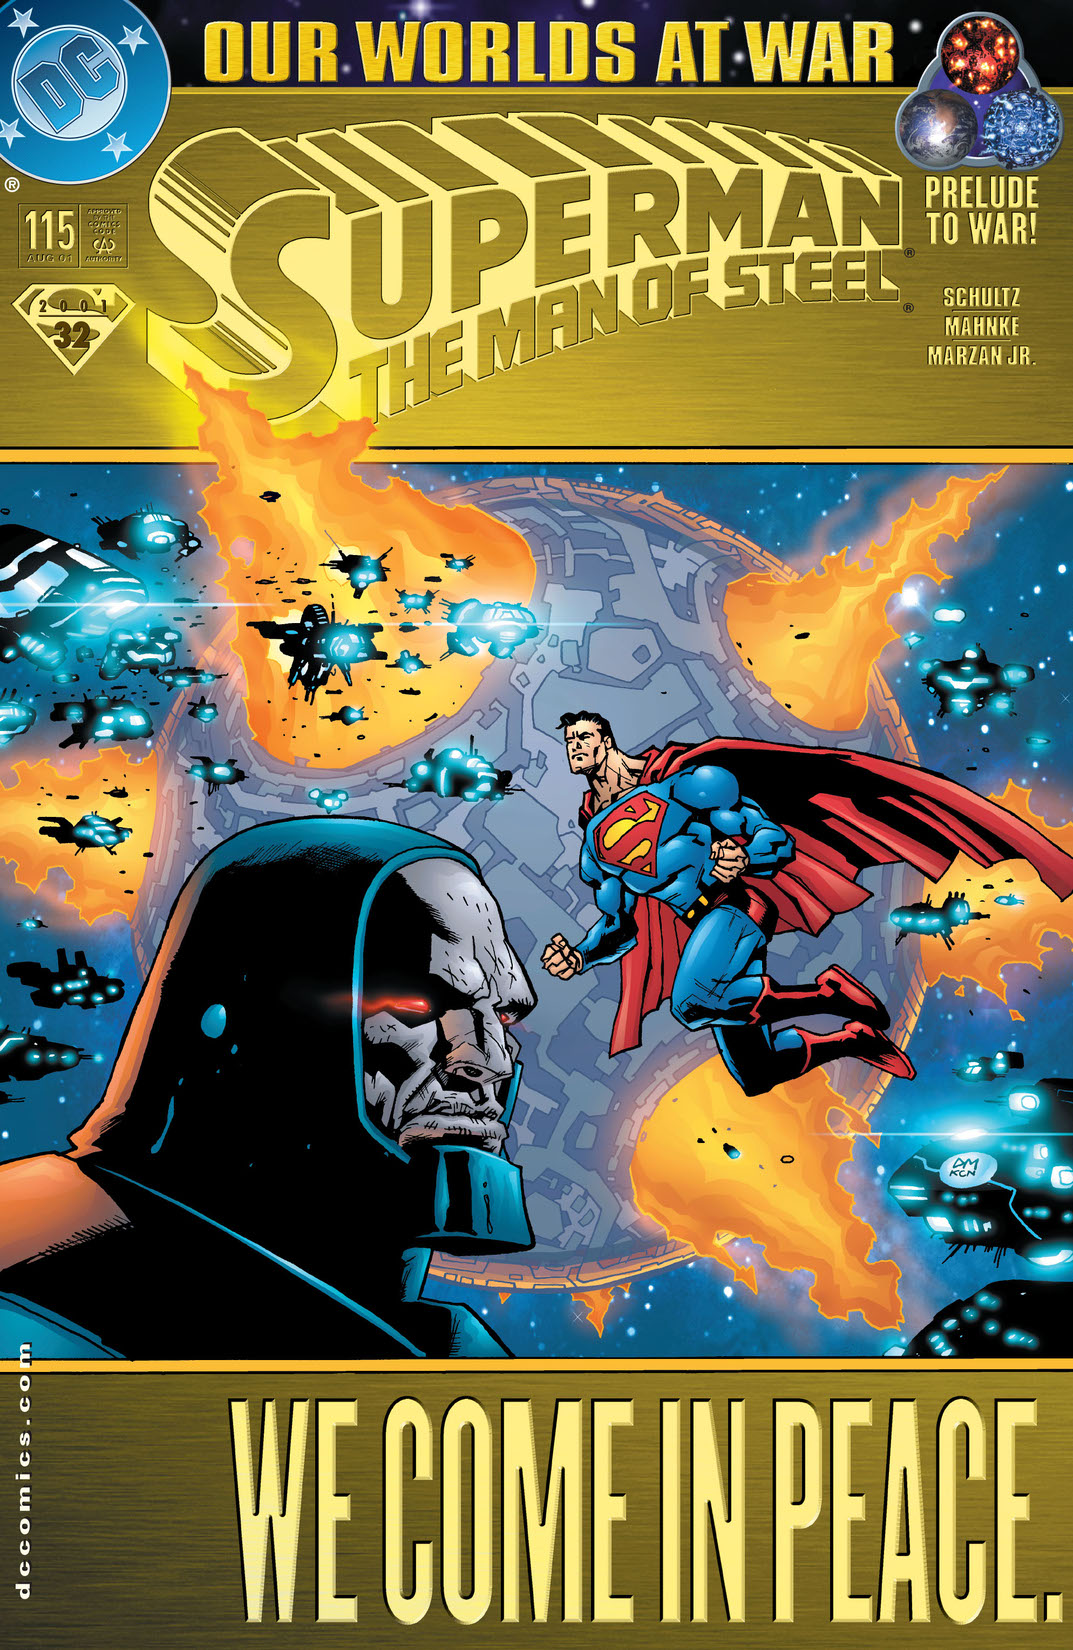 Superman: The Man of Steel #115 preview images